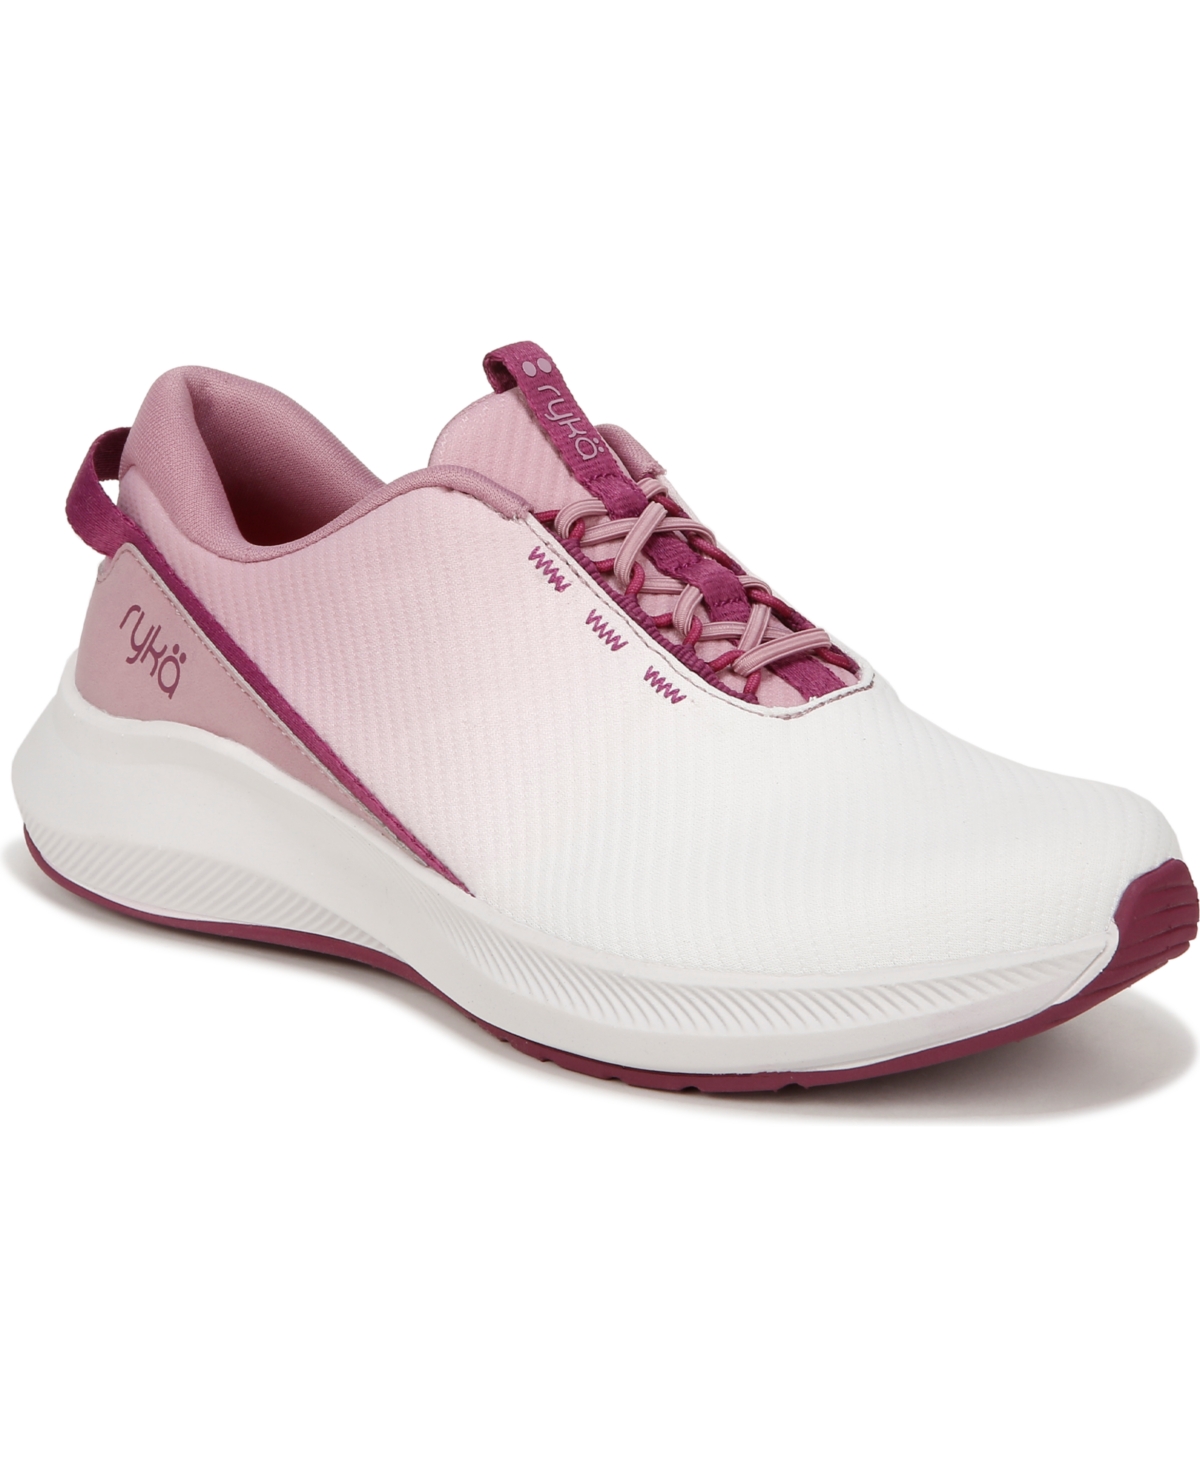 Women's Finesse Sneakers - Vintage Rose Stretch Knit Fabric